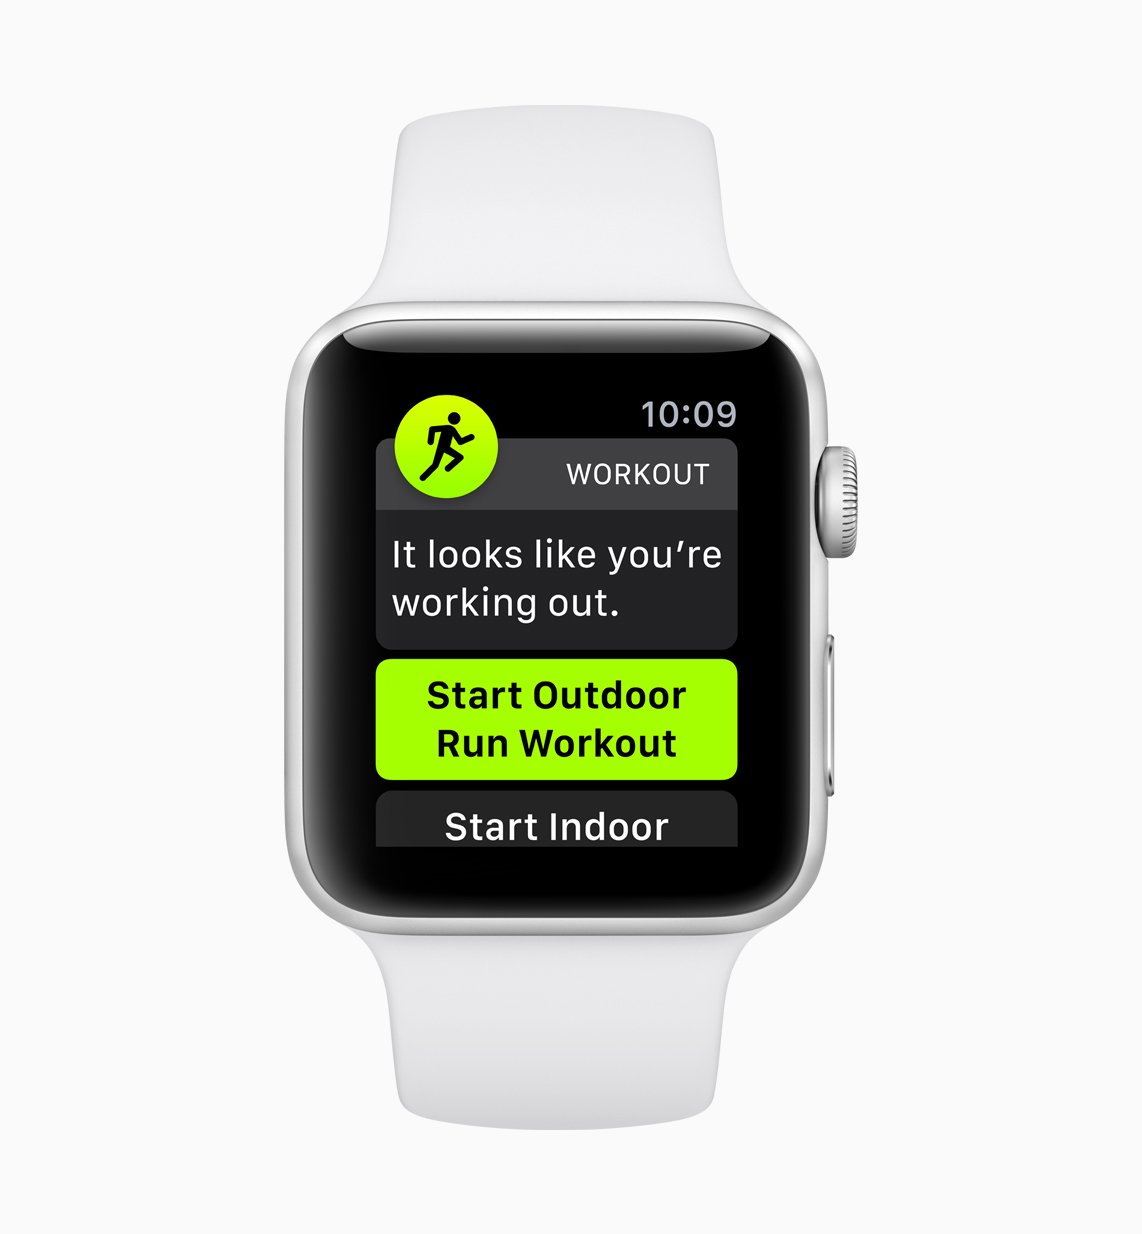 Apple-watchOS_5-Workout-Detections-01-screen-06042018